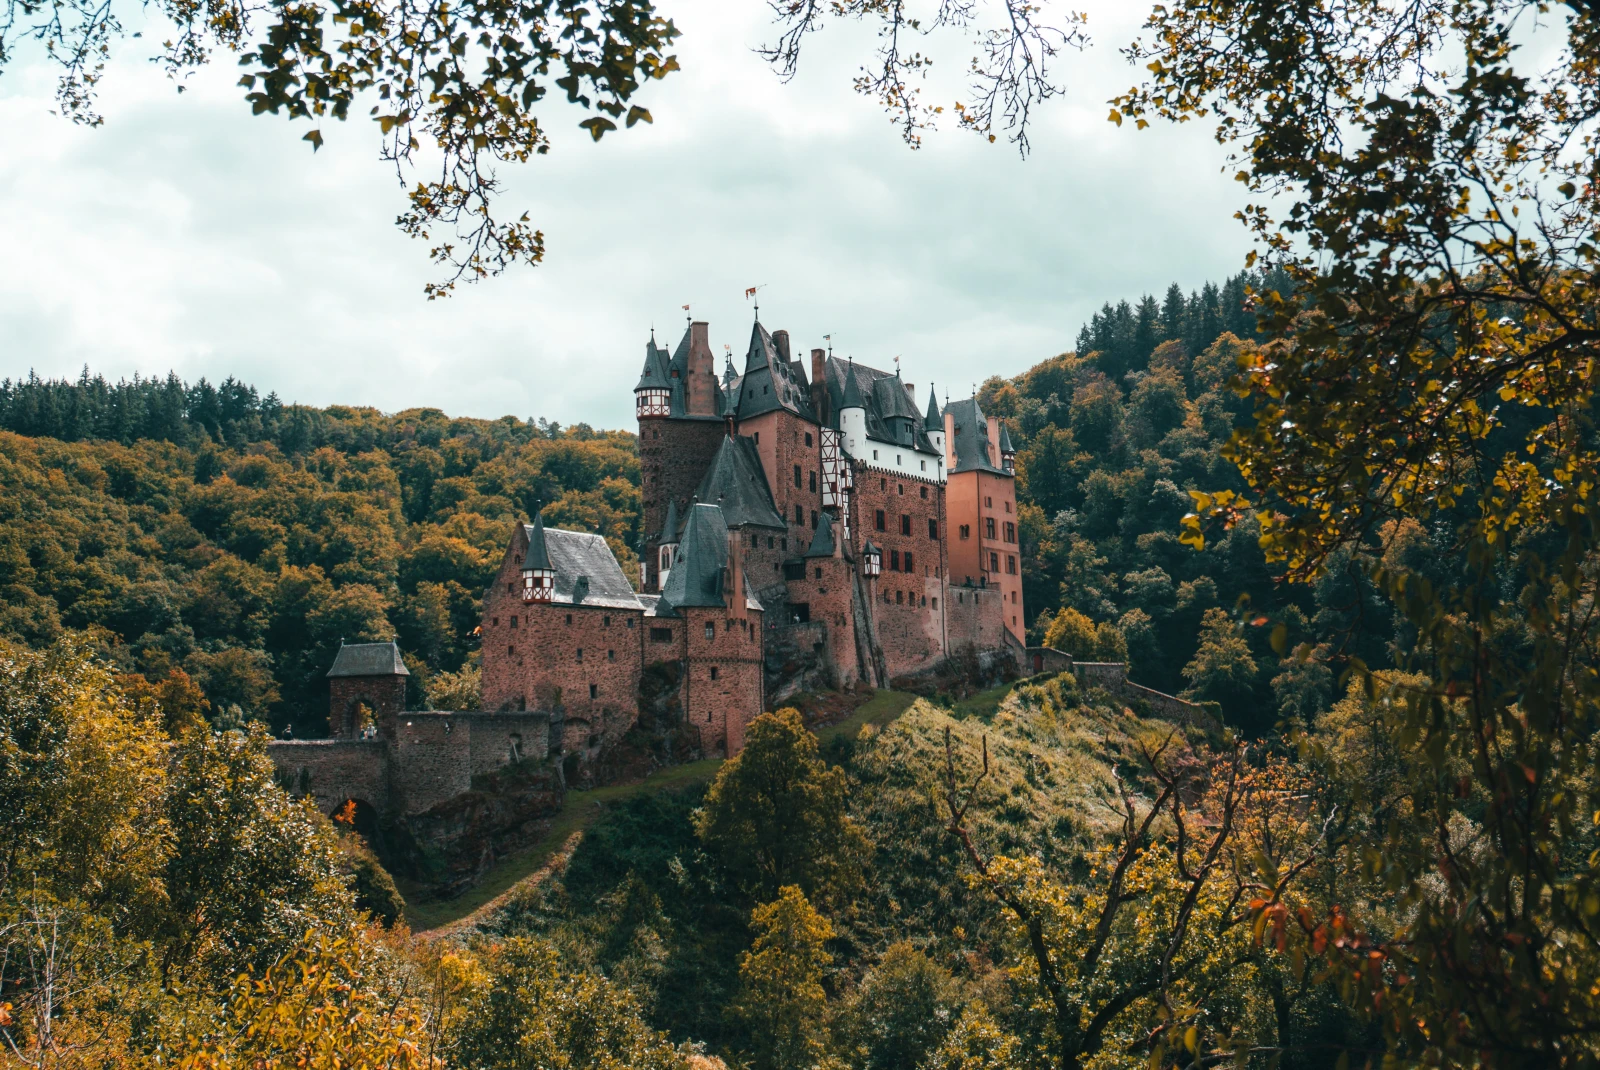 Eltz castle perched on a hill surrounded by trees in Germany